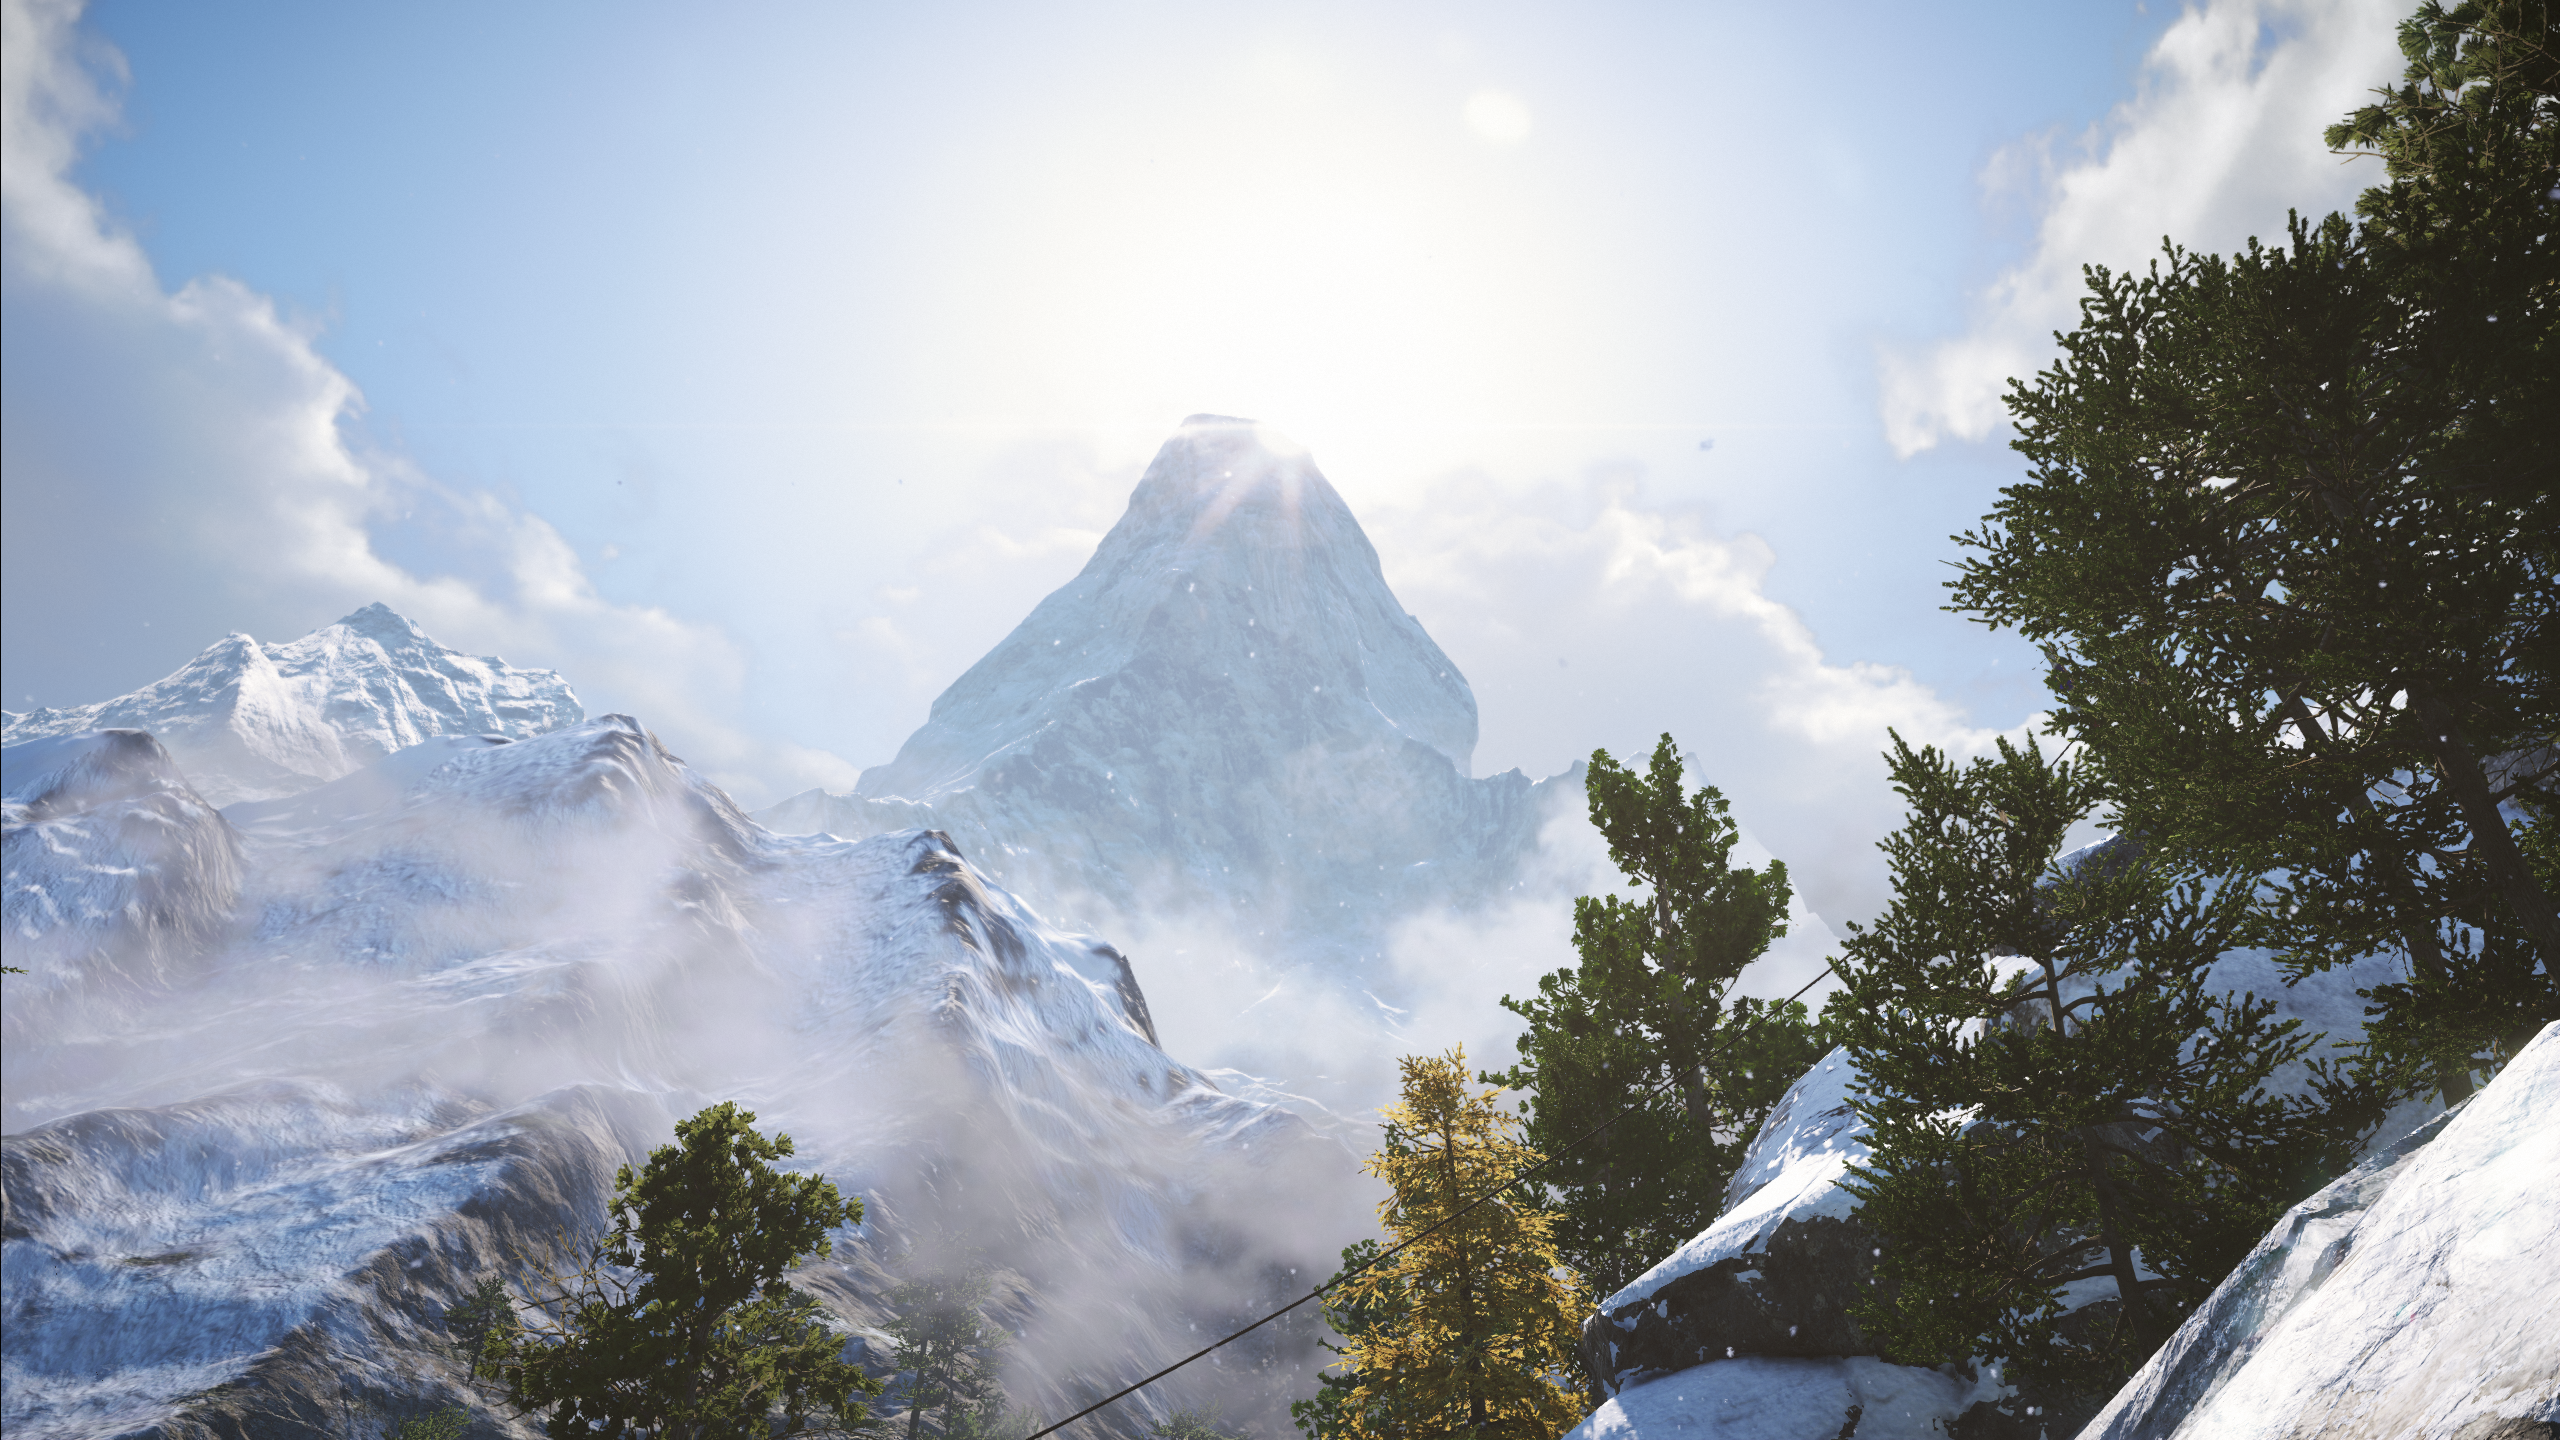 farcry42014-11-2118-1hkuqq.png